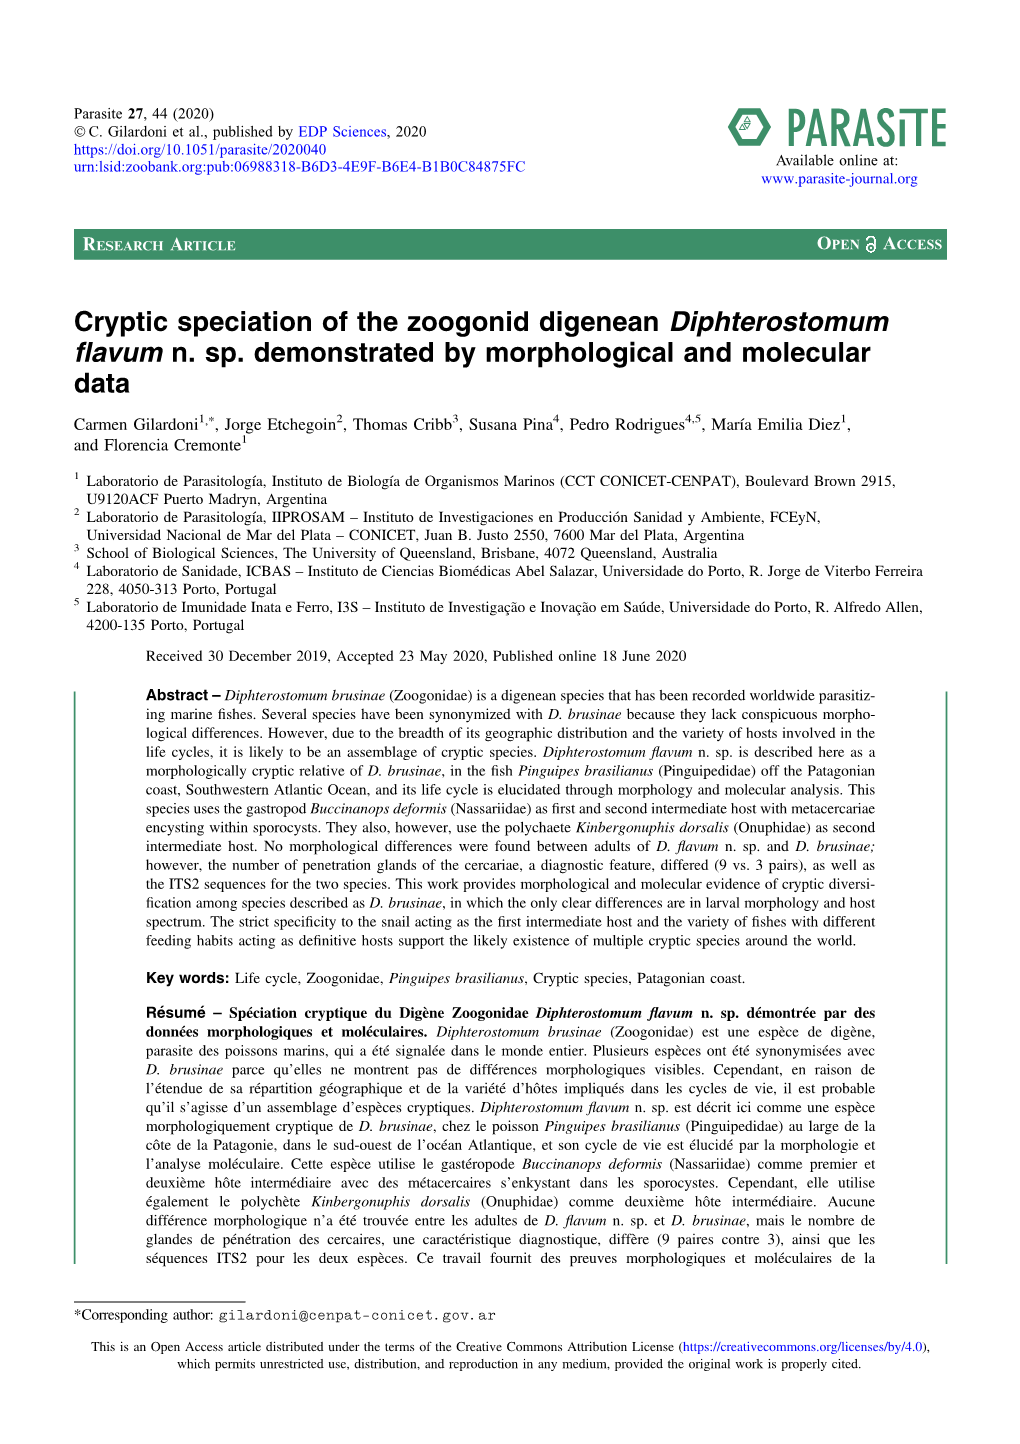 Cryptic Speciation of the Zoogonid Digenean Diphterostomum Flavum N. Sp. Demonstrated by Morphological and Molecular Data